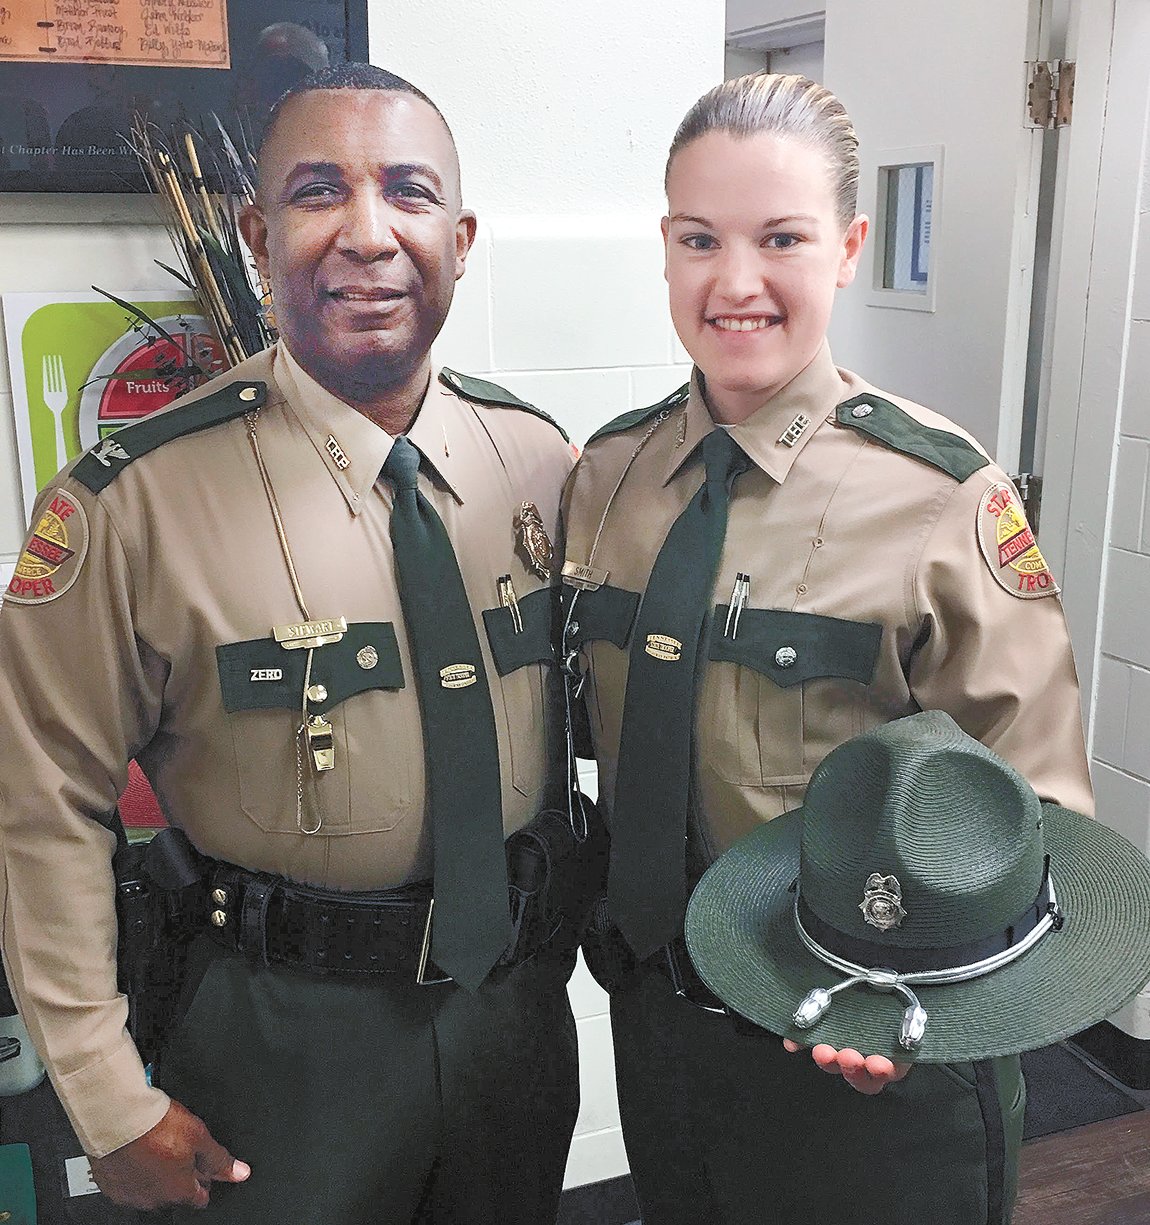 Colonel Dereck Stewart of the THP with Brenna Smith, a new member of the Tennessee Highway Patrol.